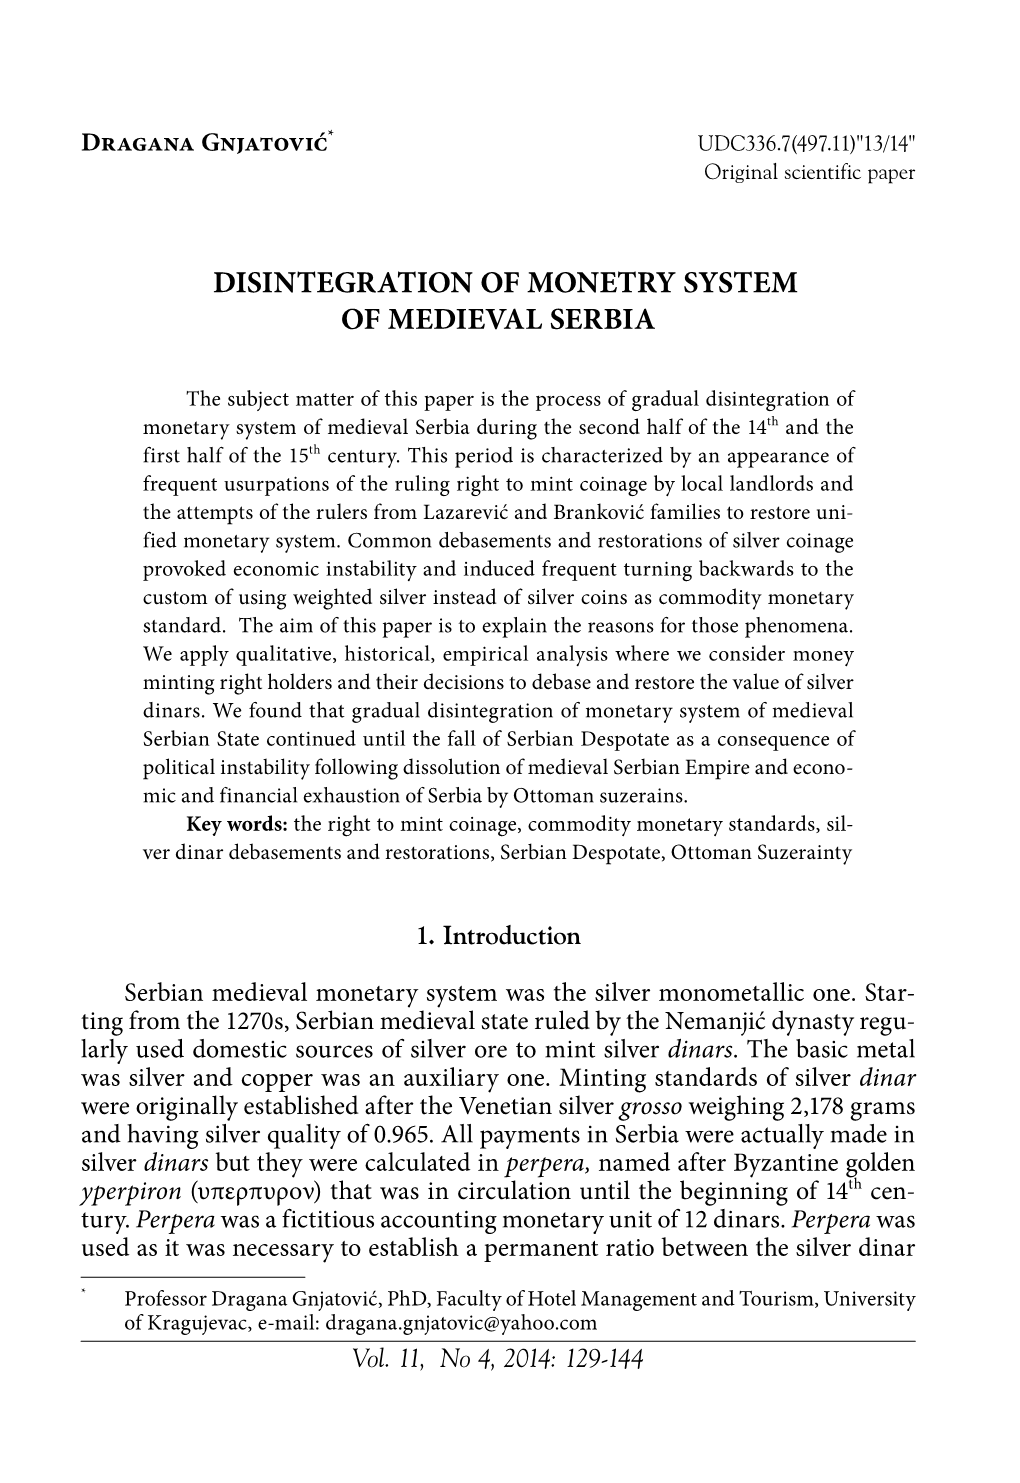 Disintegration of the Monetary System of Medieval Serbia